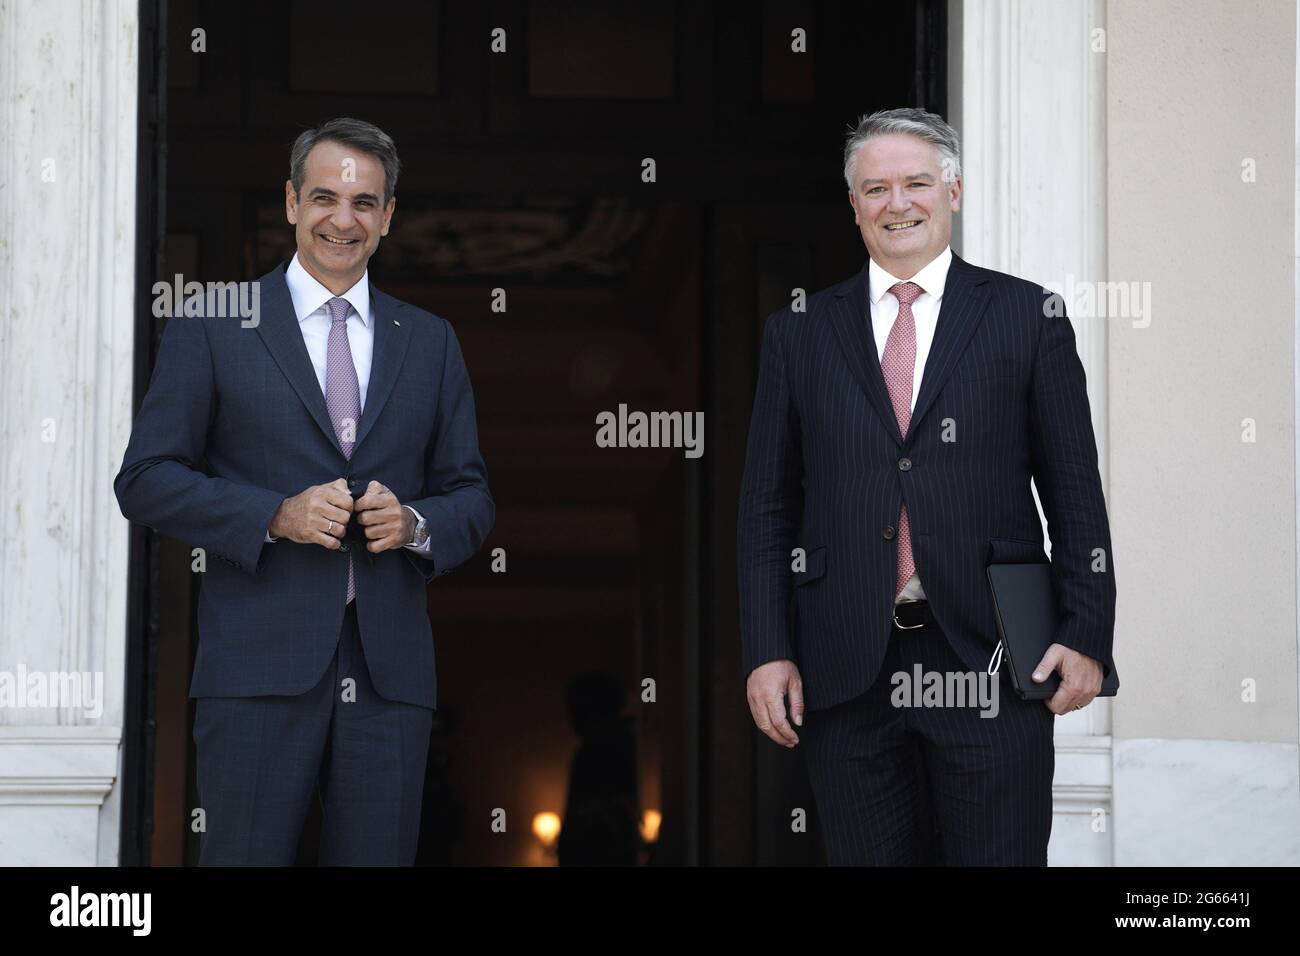 (210703) -- ATHENS, July 3, 2021 (Xinhua) -- Greek Prime Minister Kyriakos Mitsotakis (L) welcomes Organization for Economic Co-operation and Development (OECD) Secretary-General Mathias Cormann in Athens, Greece, July 2, 2021. International cooperation is more important than ever to deal with the challenges of our time, Mathias Cormann said on Friday during a visit to Athens. (Photo by Nick Paleologos/Xinhua) Stock Photo